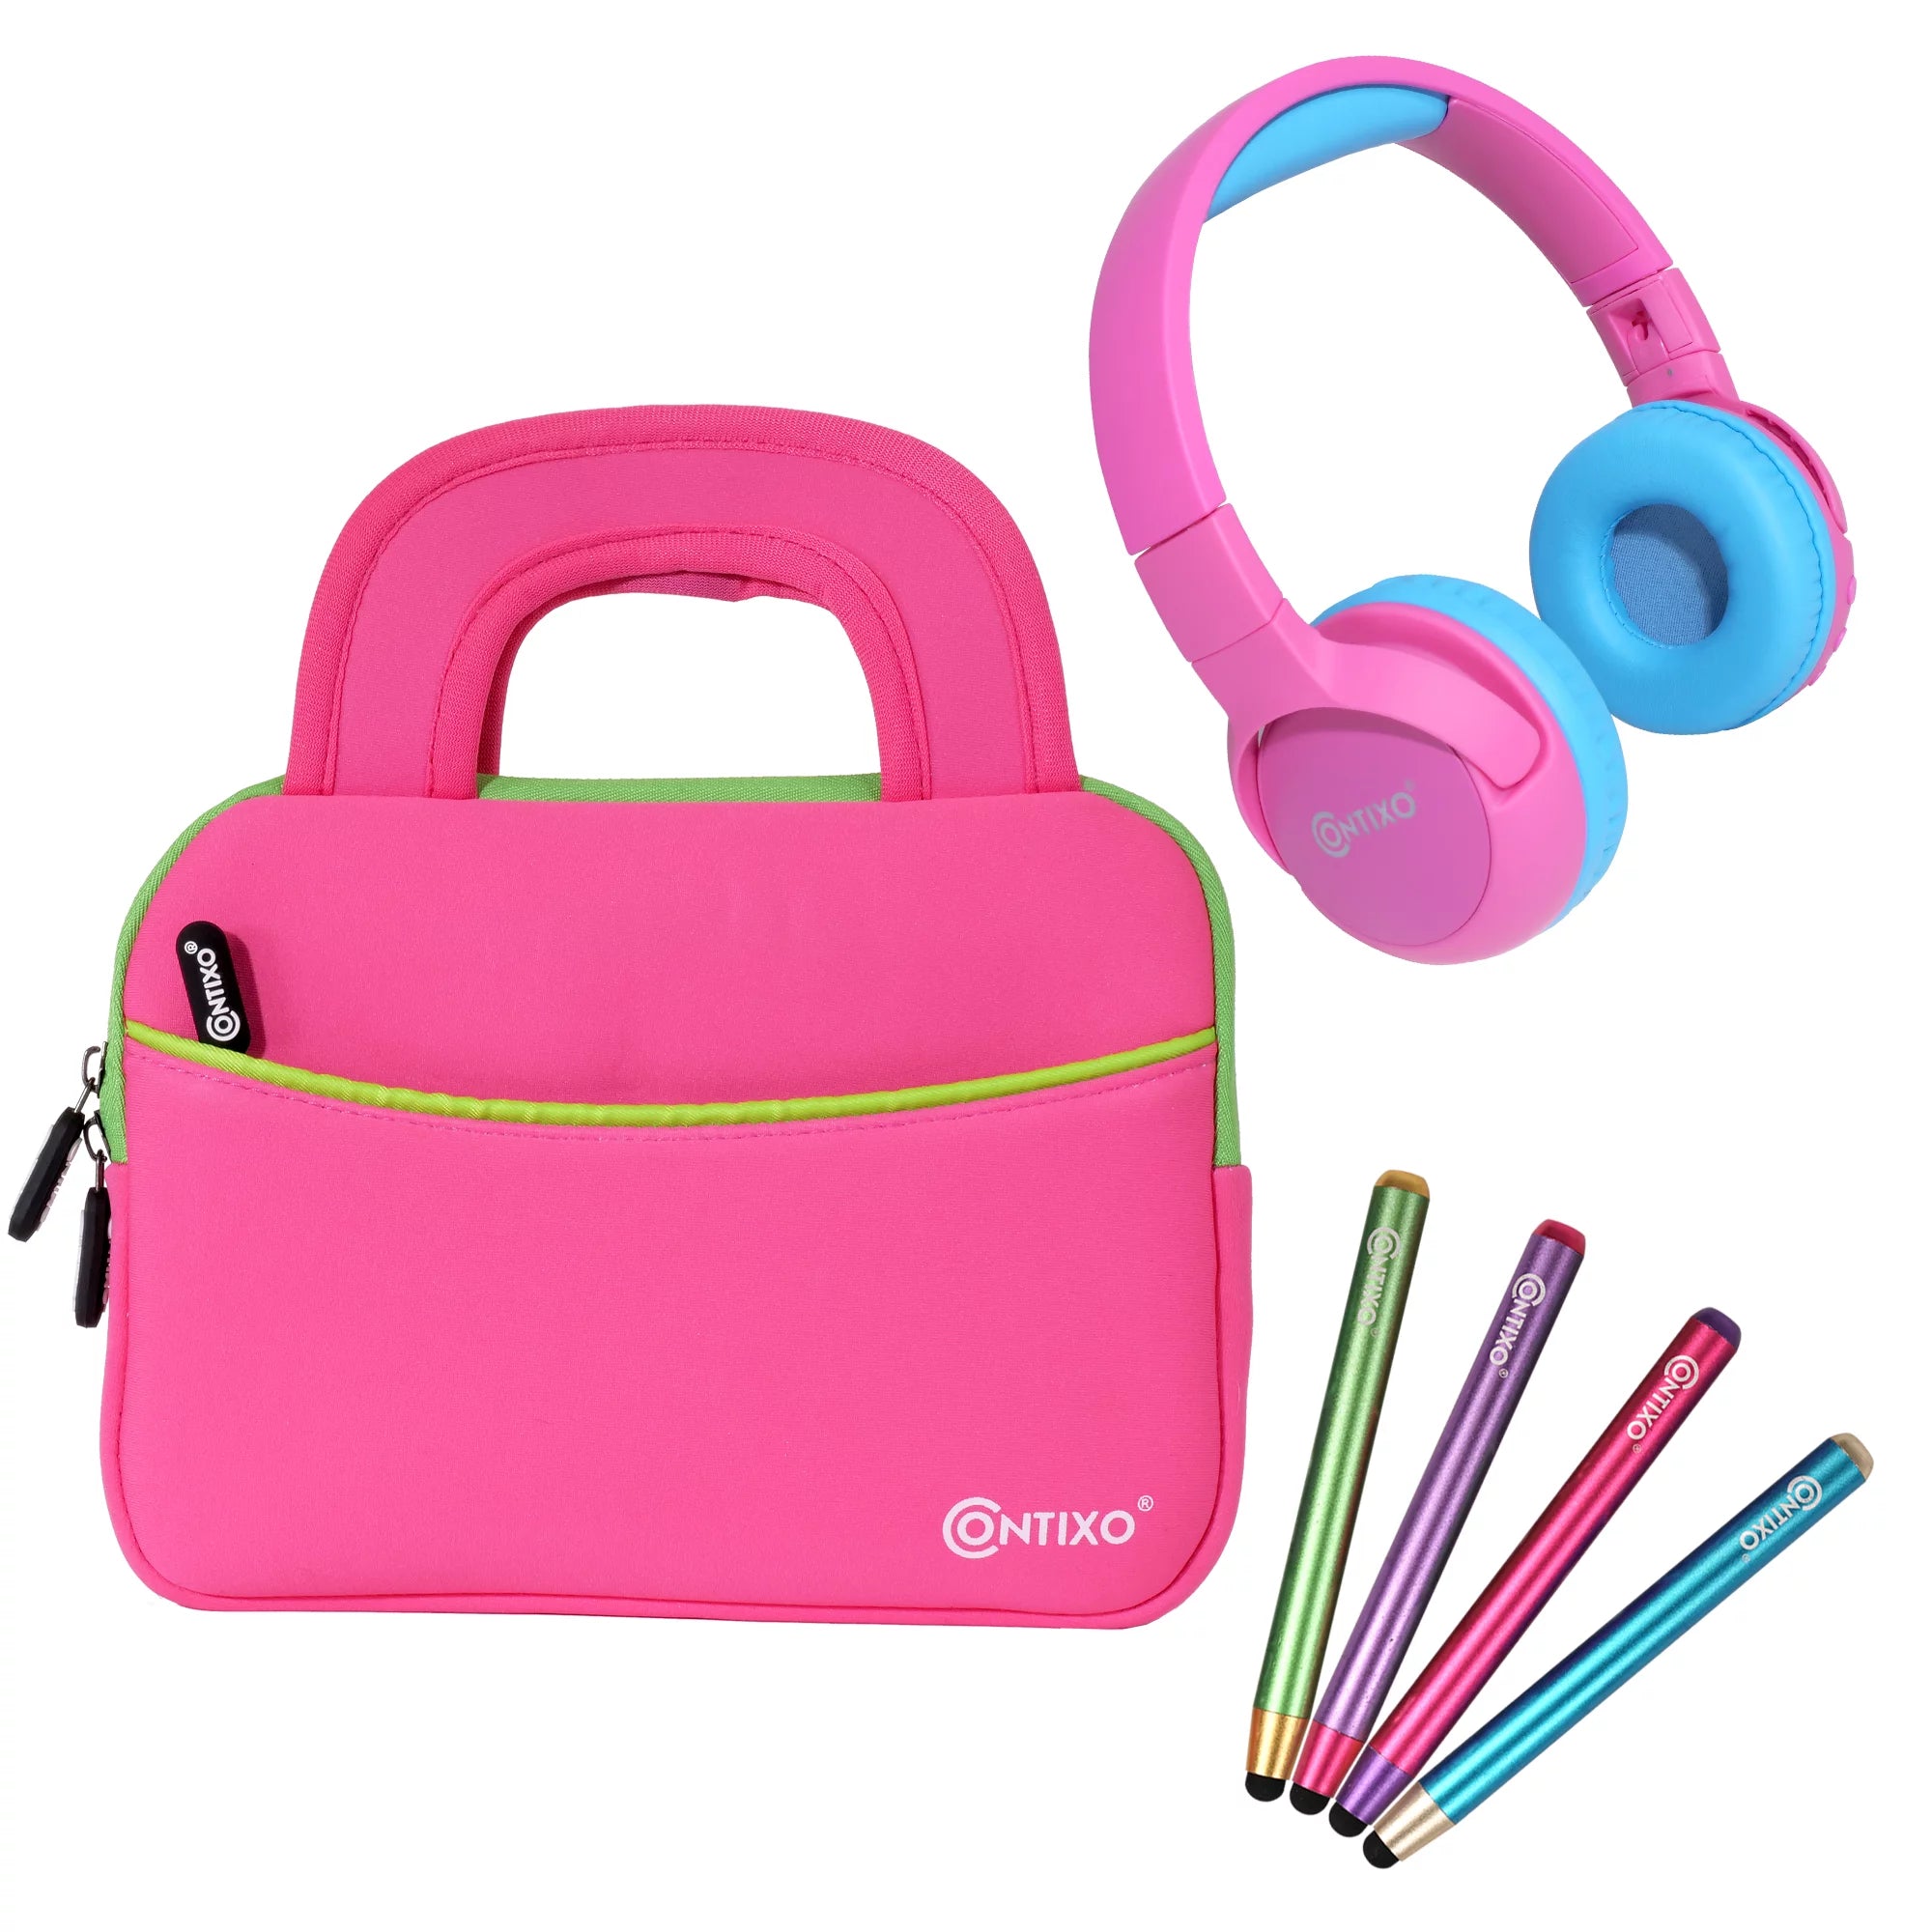 Contixo Kids Tablet Accessories Bundle -  Bluetooth Headphones, 4 Stylus Pens, and 10-inch Tablet Carrying Bag